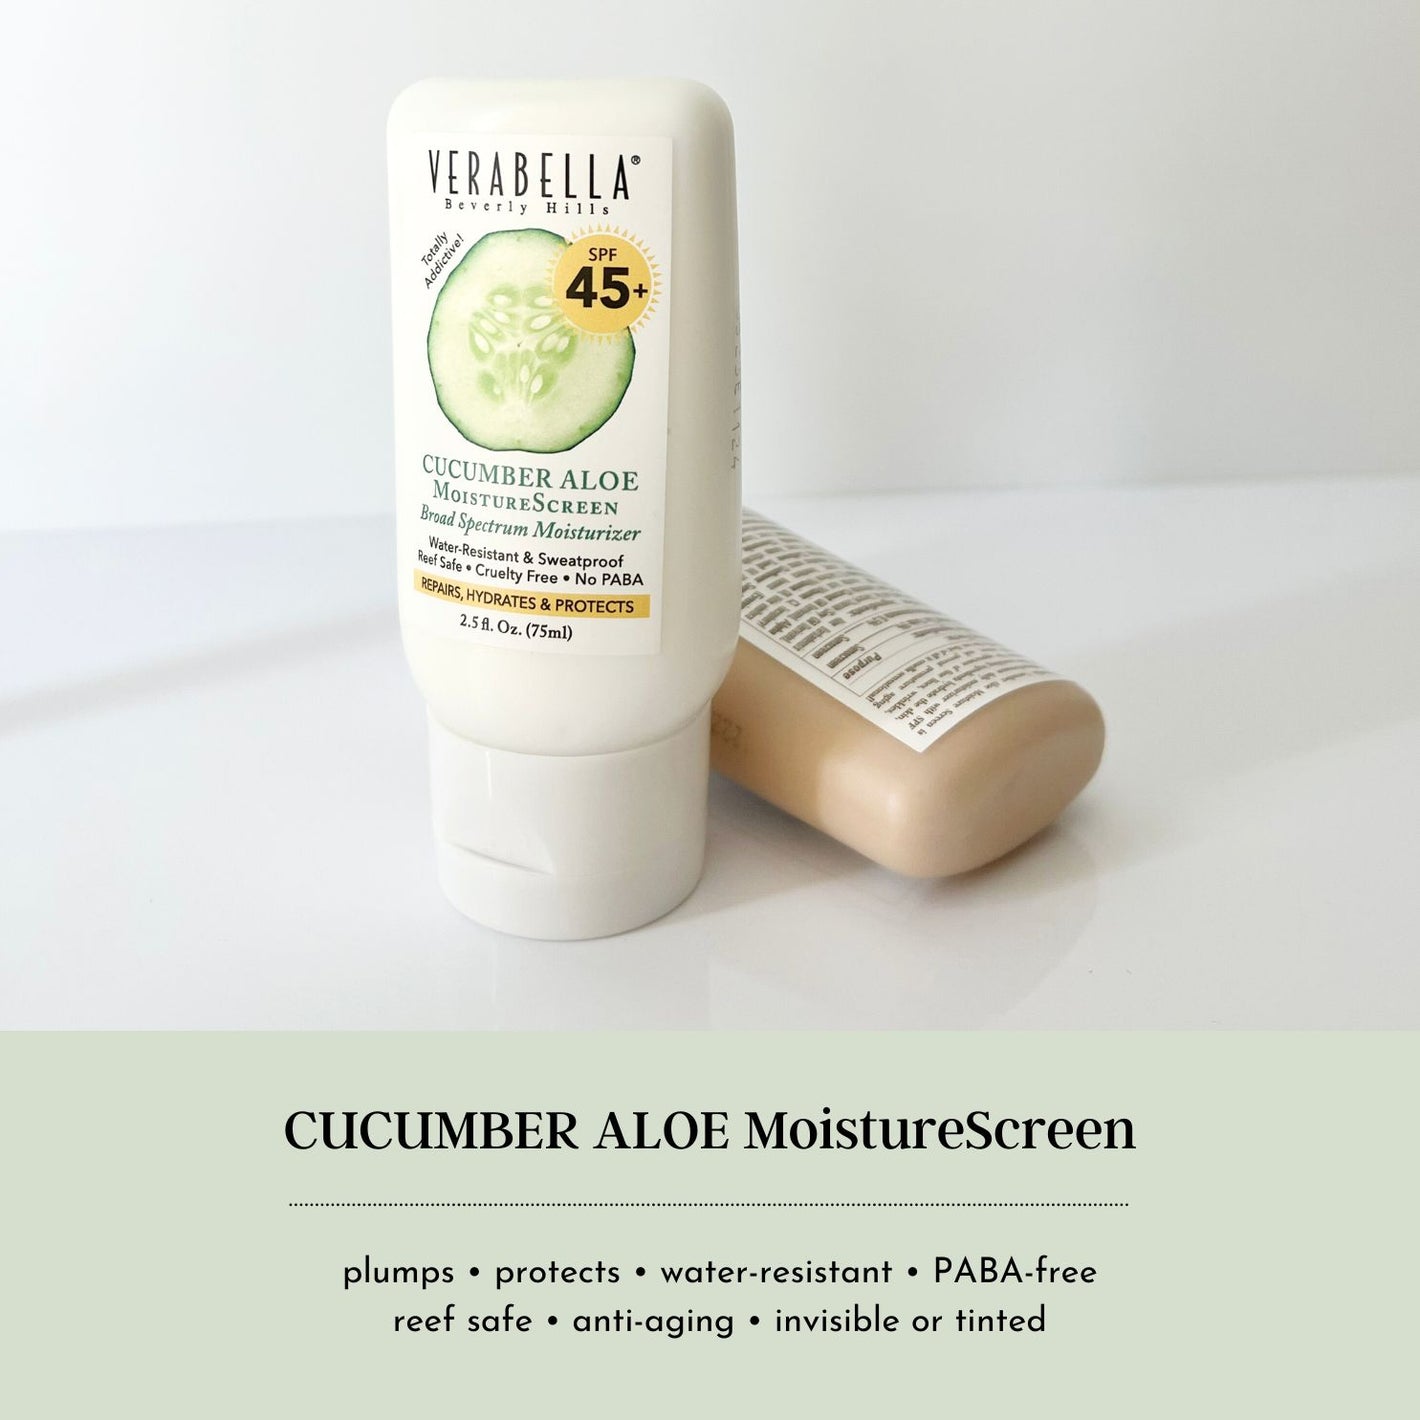 Cucumber Aloe MoistureScreen plumps and protects, water-resistant, PABA-free, further details provided below